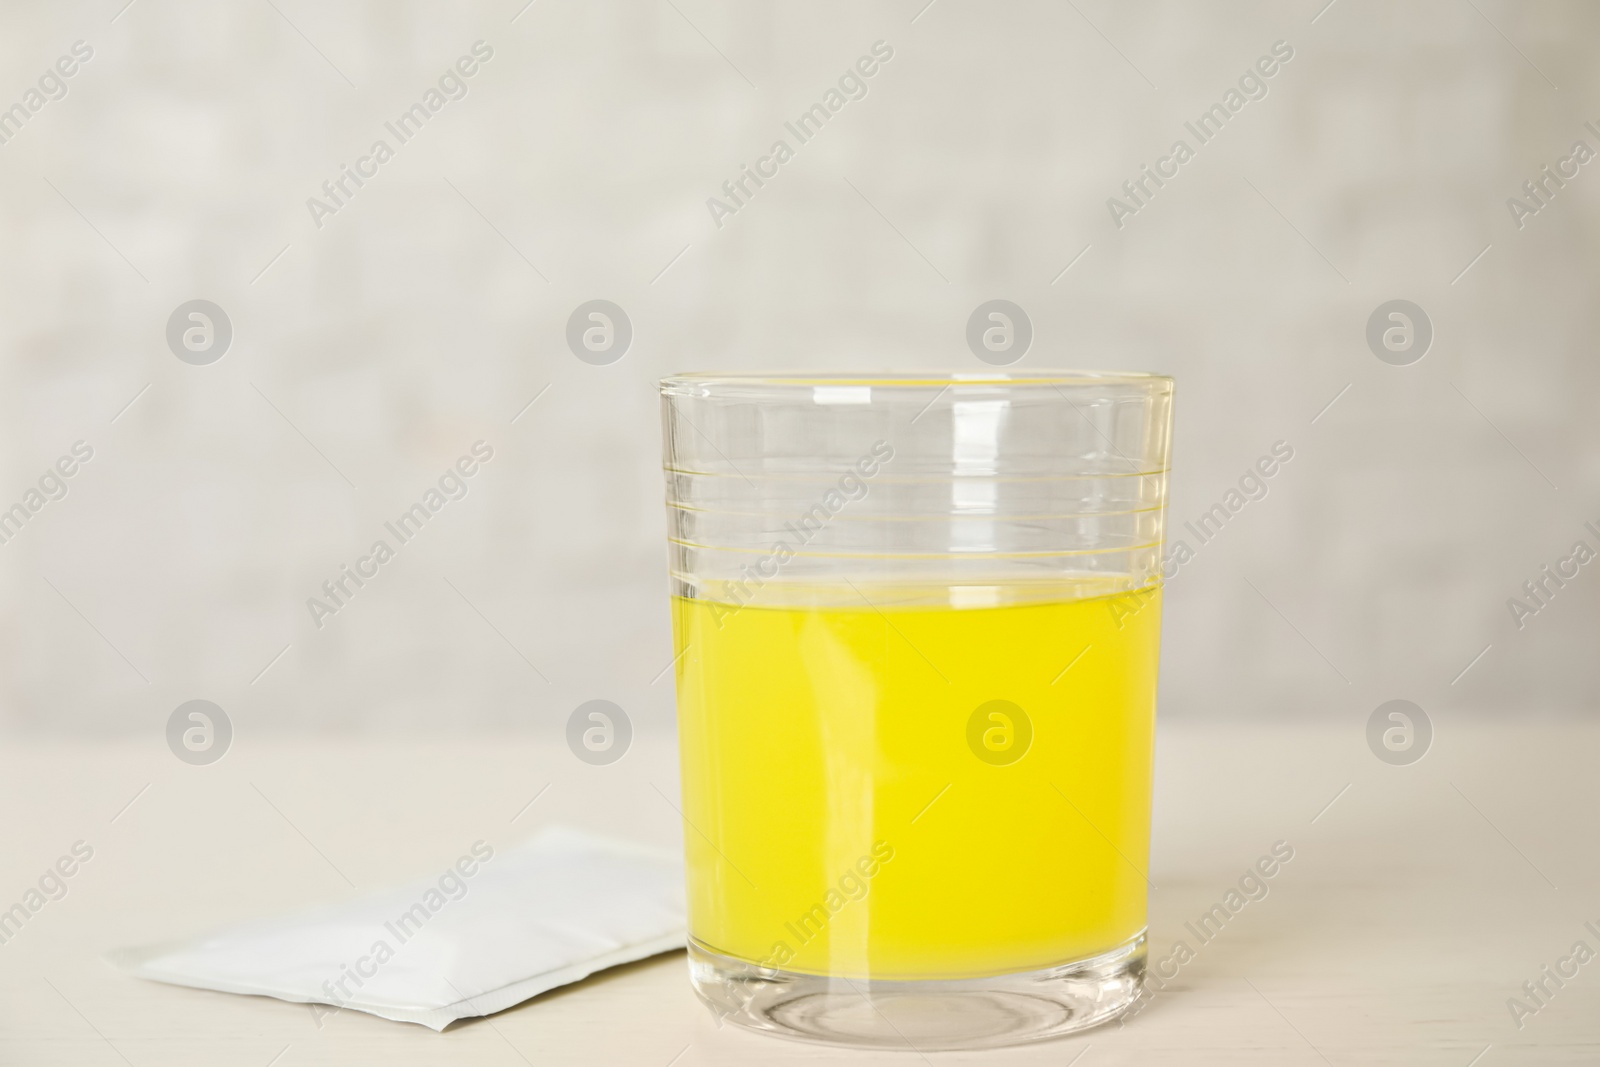 Photo of Glass of dissolved medicine and sachet on white wooden table